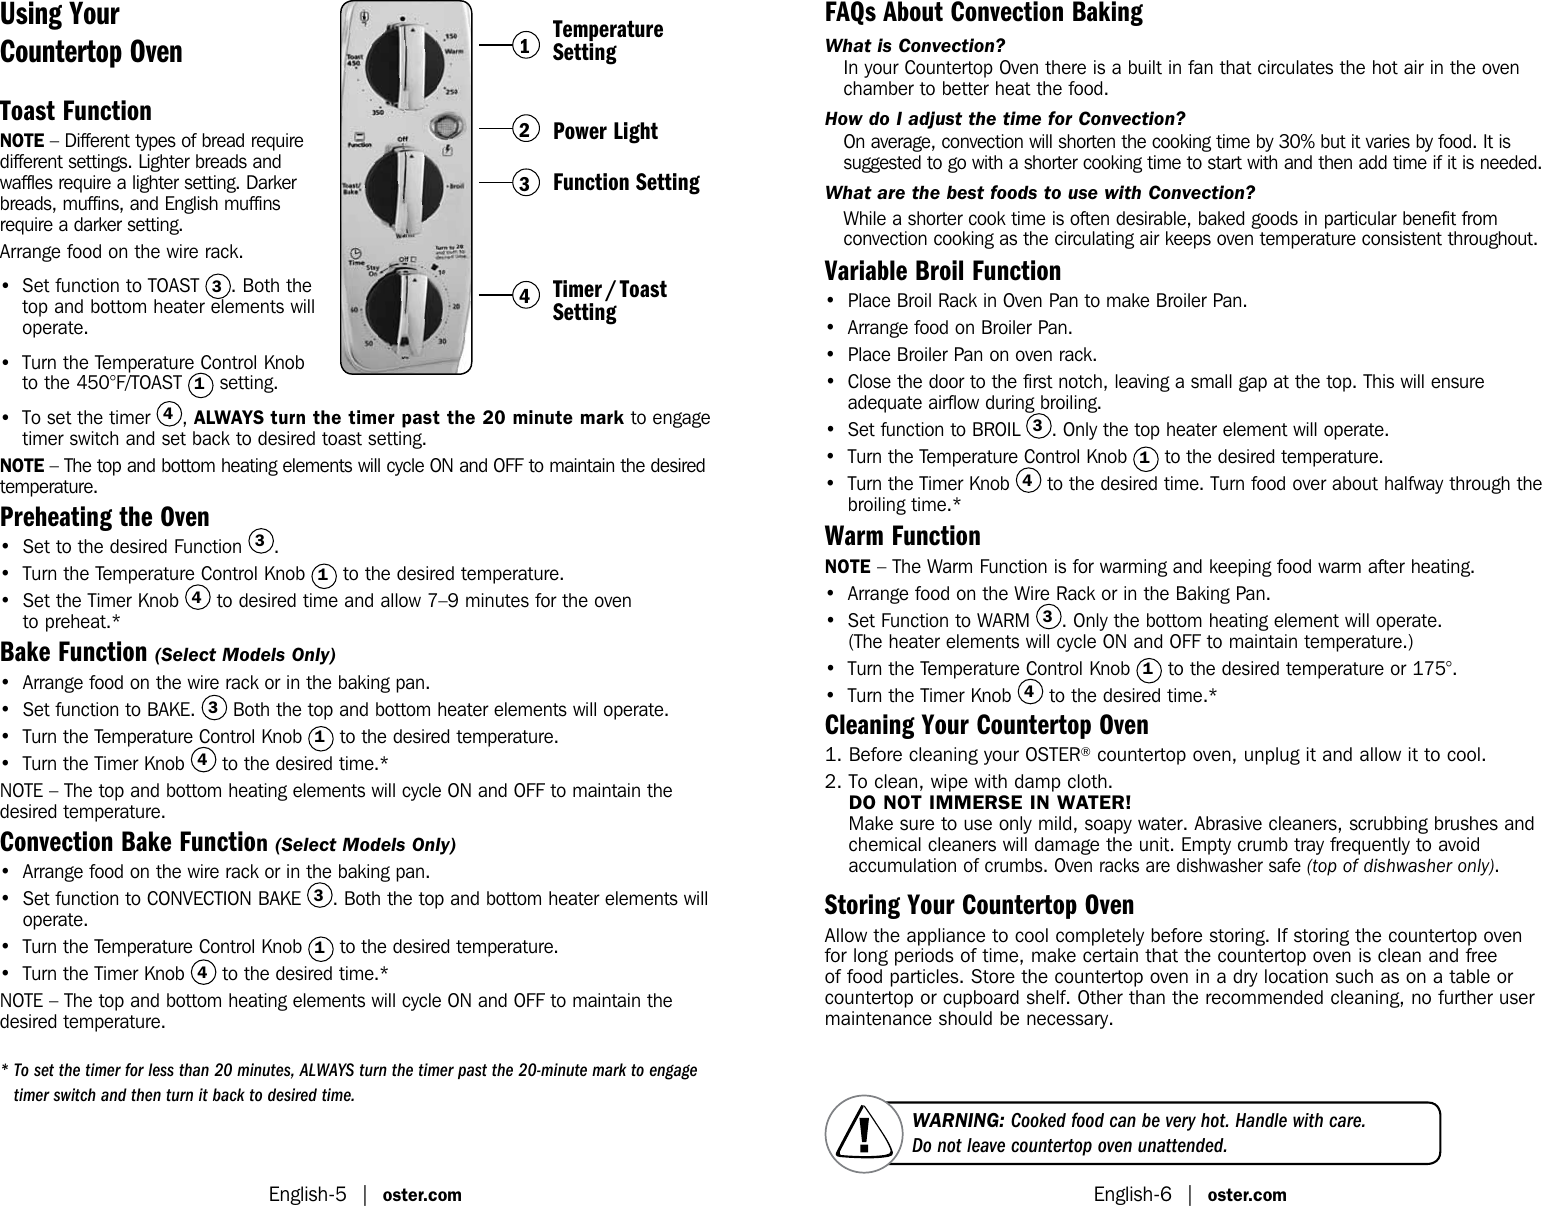 Page 4 of 11 - Oster Oster-Tssttv0000-Oster-Stainless-Steel-6-Slice-Toaster-Oven-Instruction-Manual-  Oster-tssttv0000-oster-stainless-steel-6-slice-toaster-oven-instruction-manual